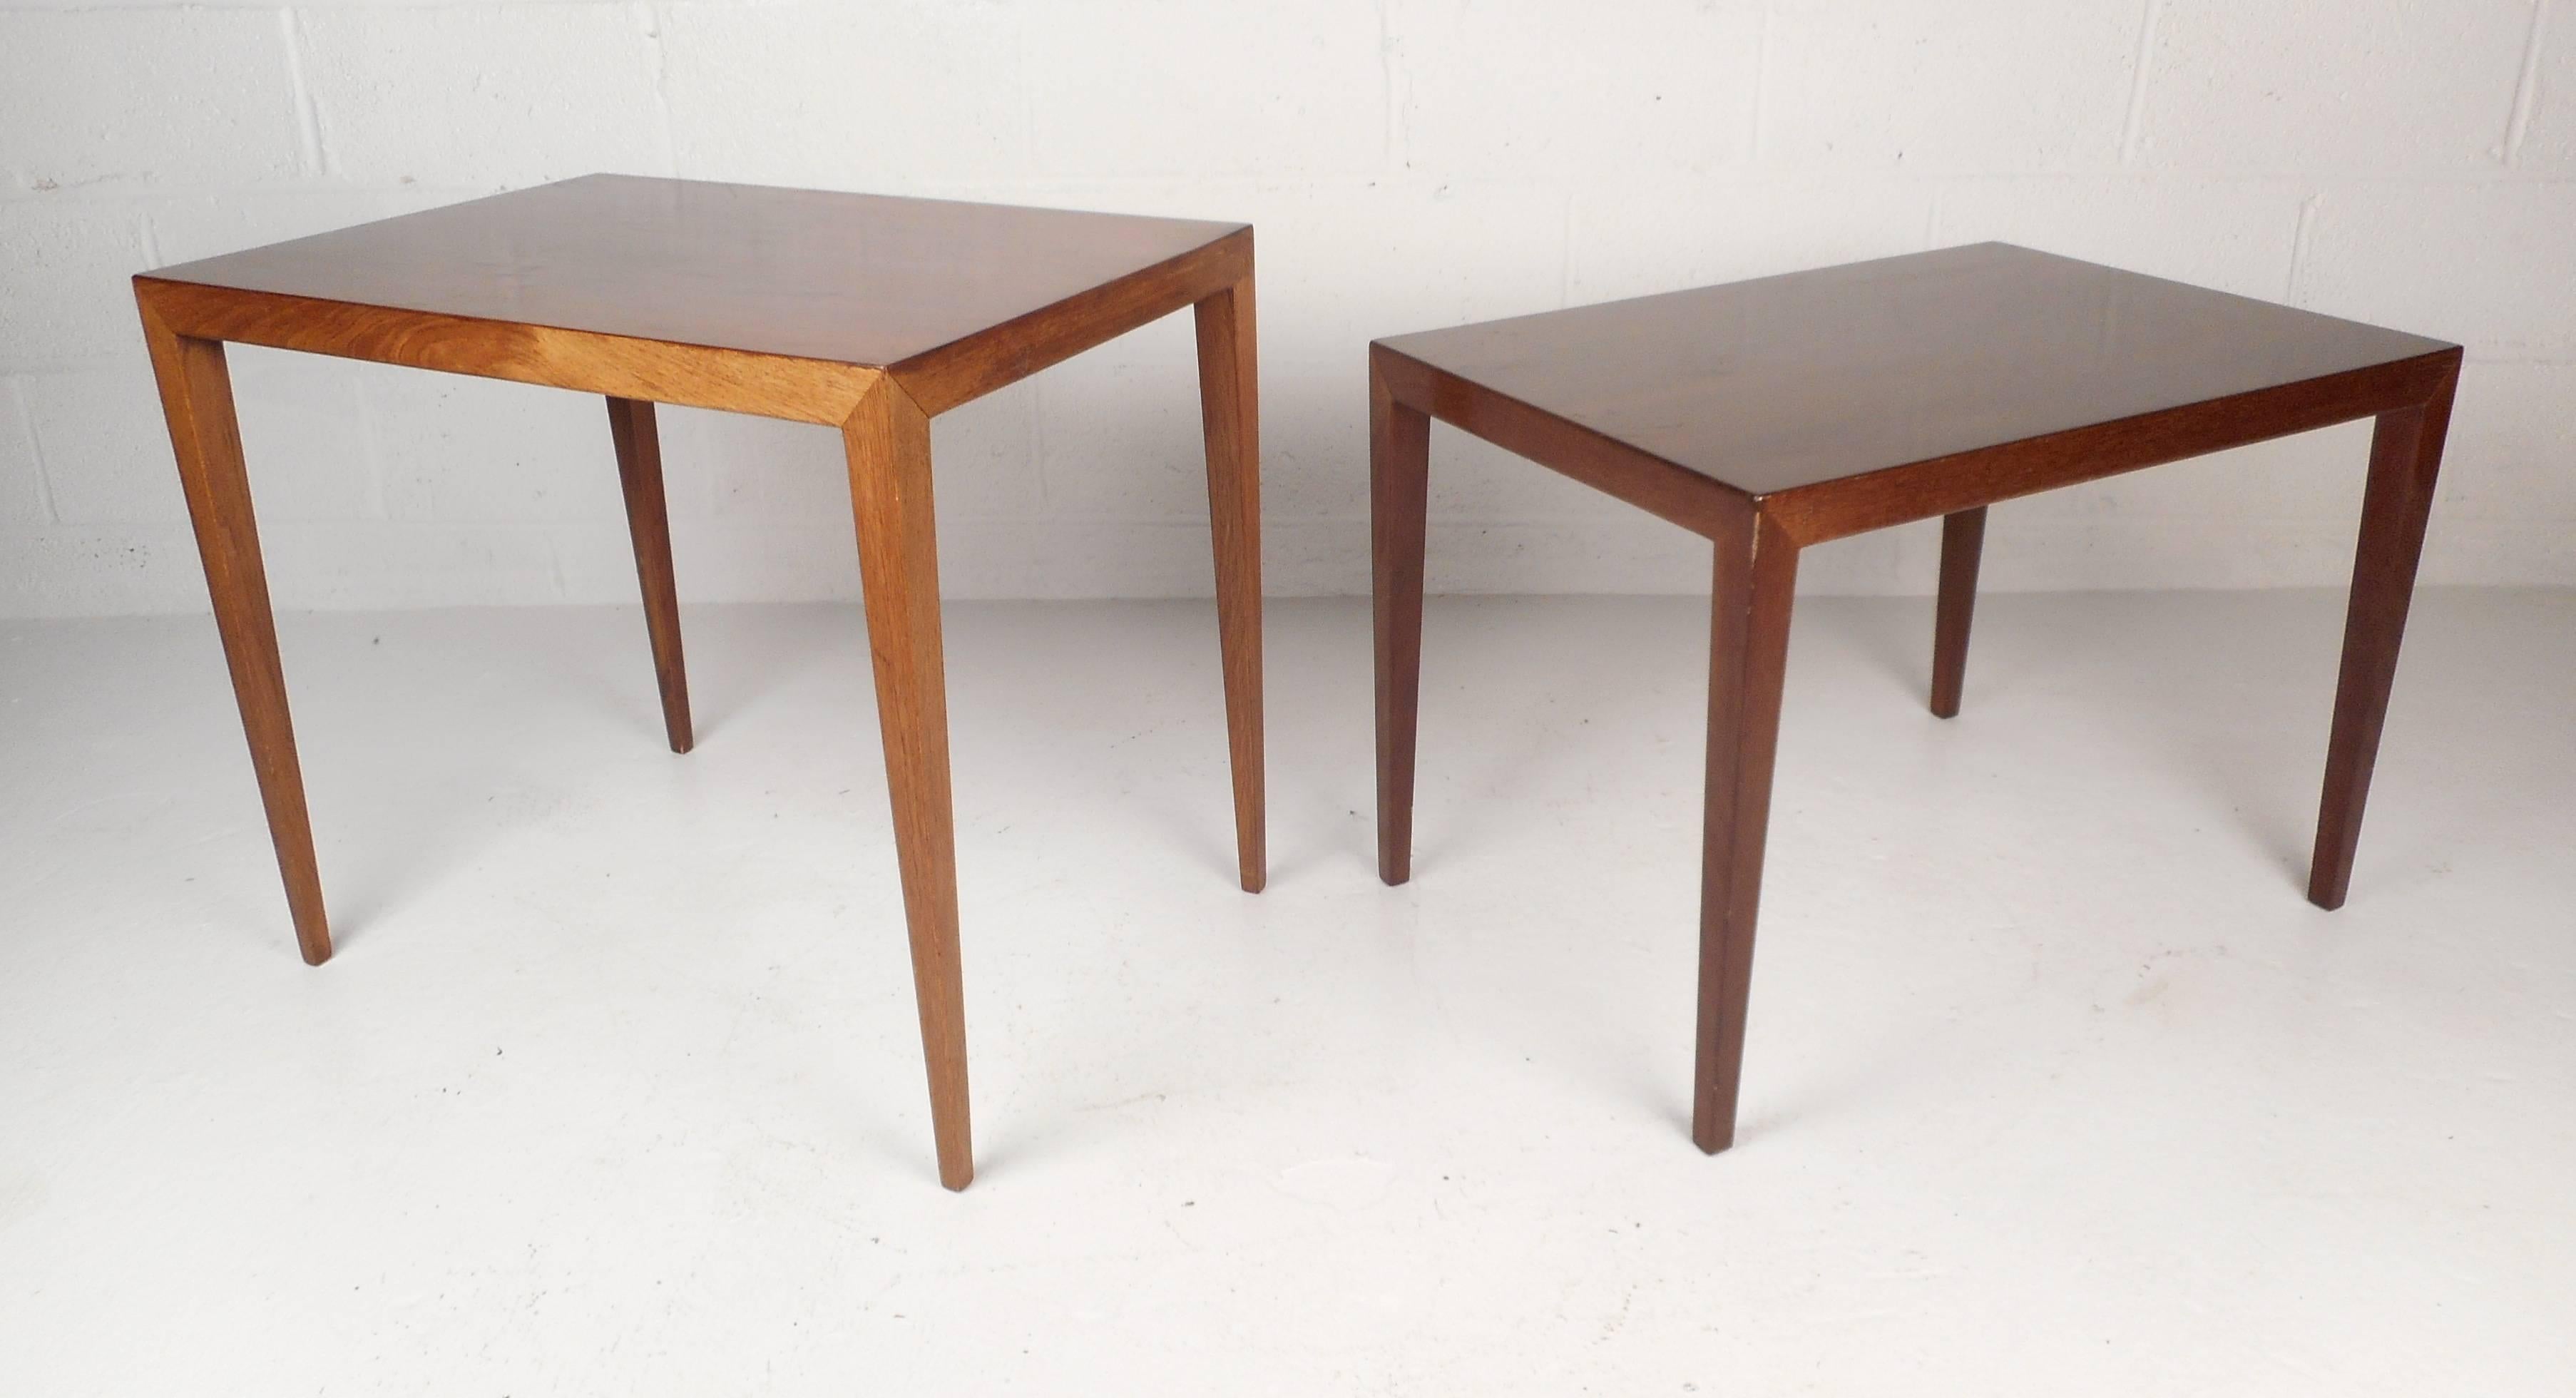 This beautiful pair of vintage modern side tables feature long tapered legs and a rectangular top. Two end tables with unusual slender legs an elegant wood grain throughout. This unique mid-century pair makes the perfect addition to any modern